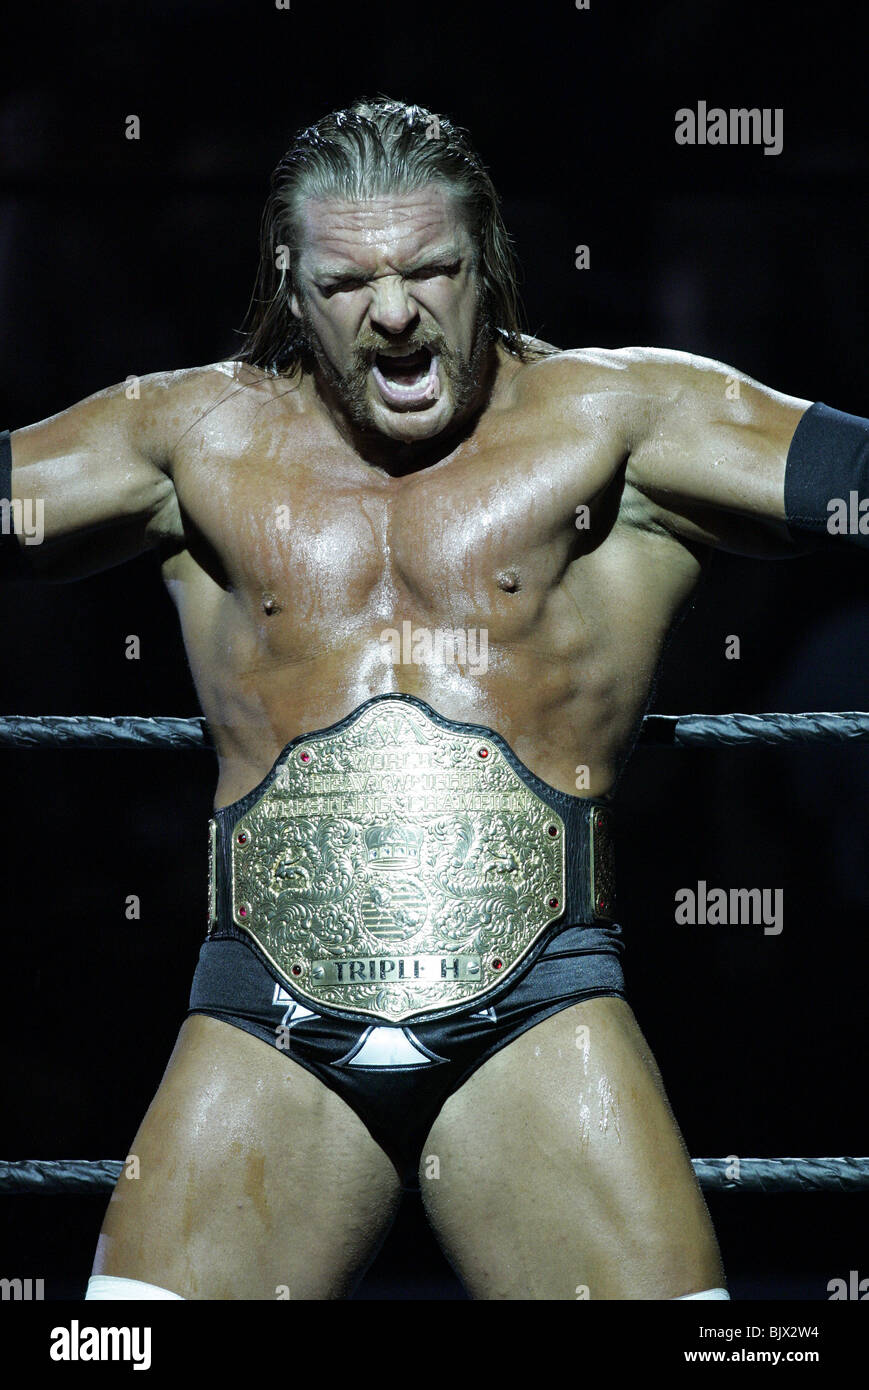 TRIPLE H WRESTLEMANIA 21 GOES HOLLYWOOD STAPLES CENTER LOS ANGELES USA 03 April 2005 Stock Photo